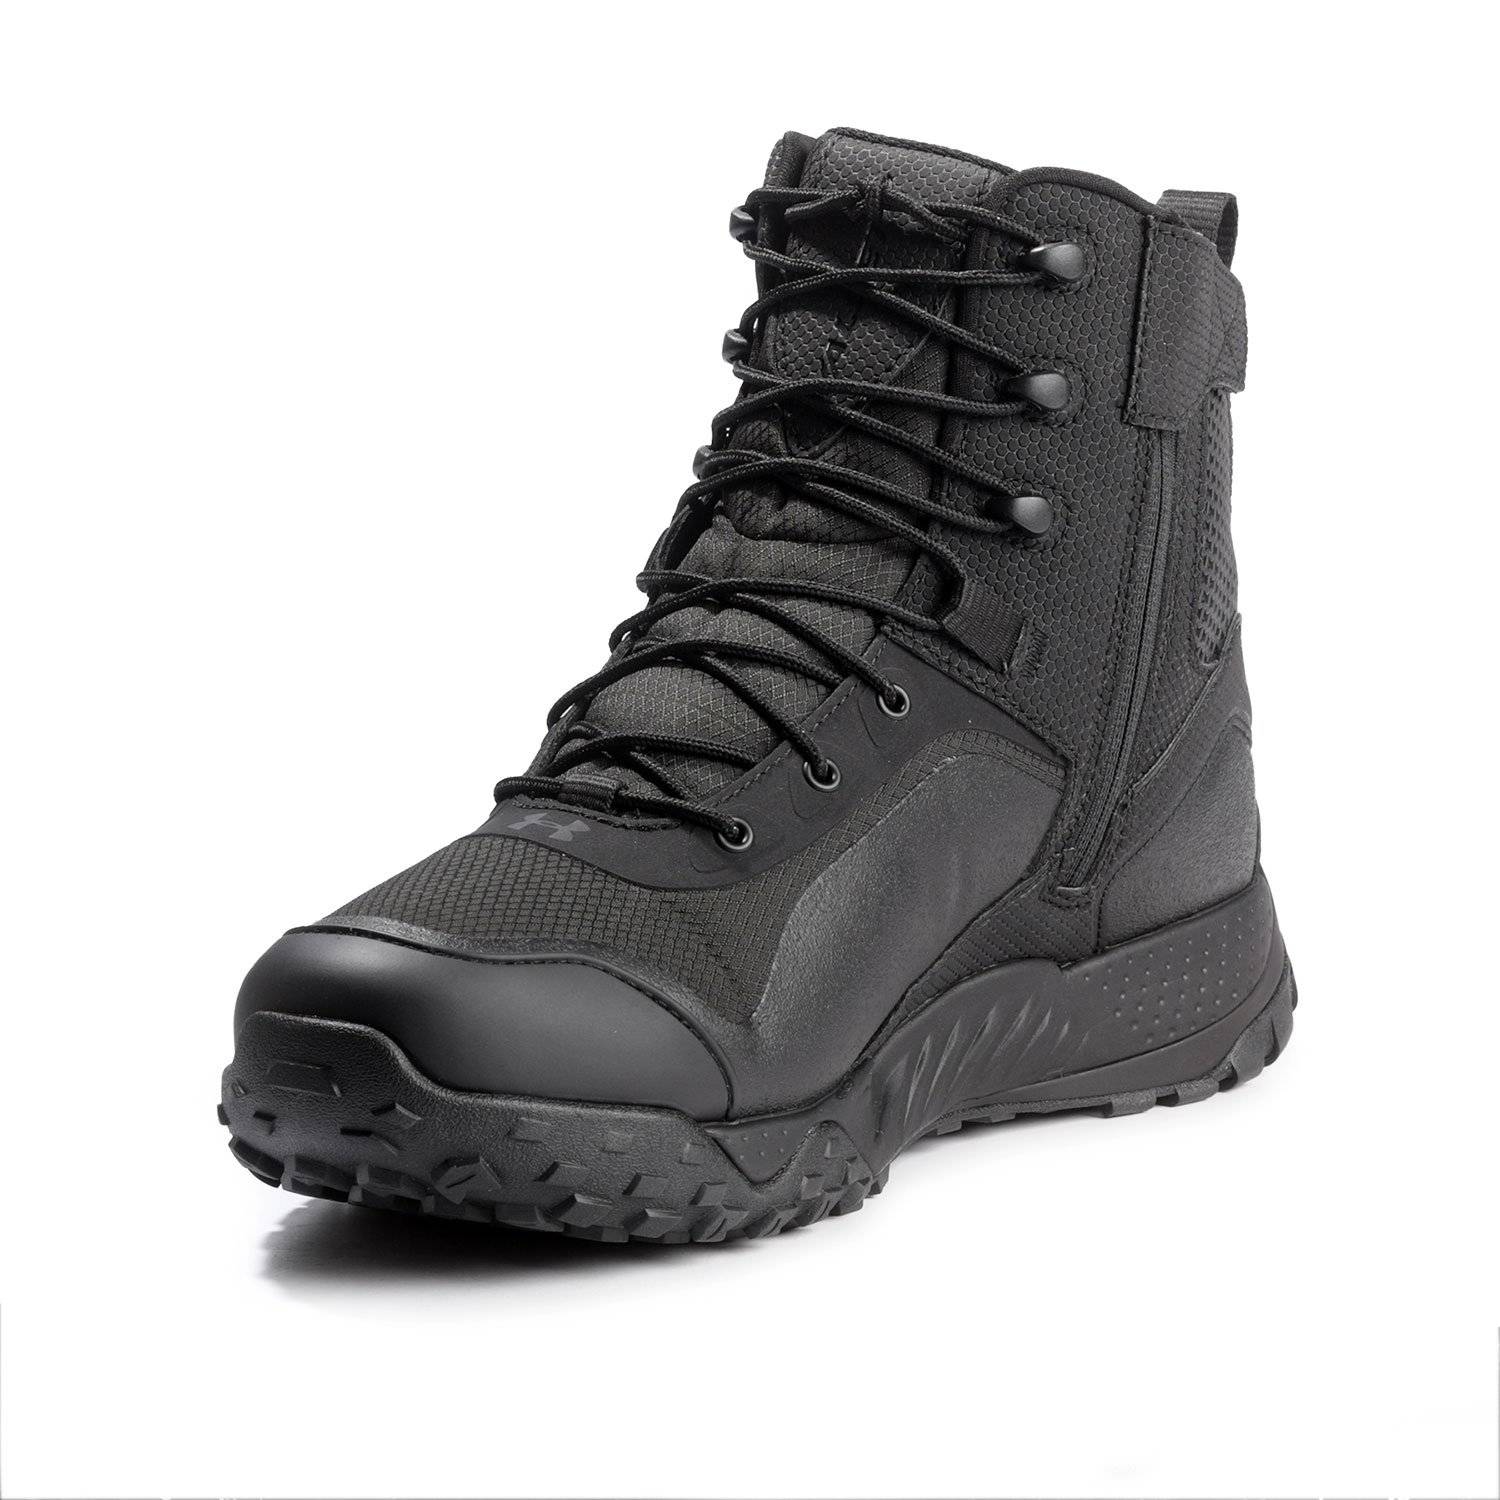 men's valsetz rts 1.5 with zipper military and tactical